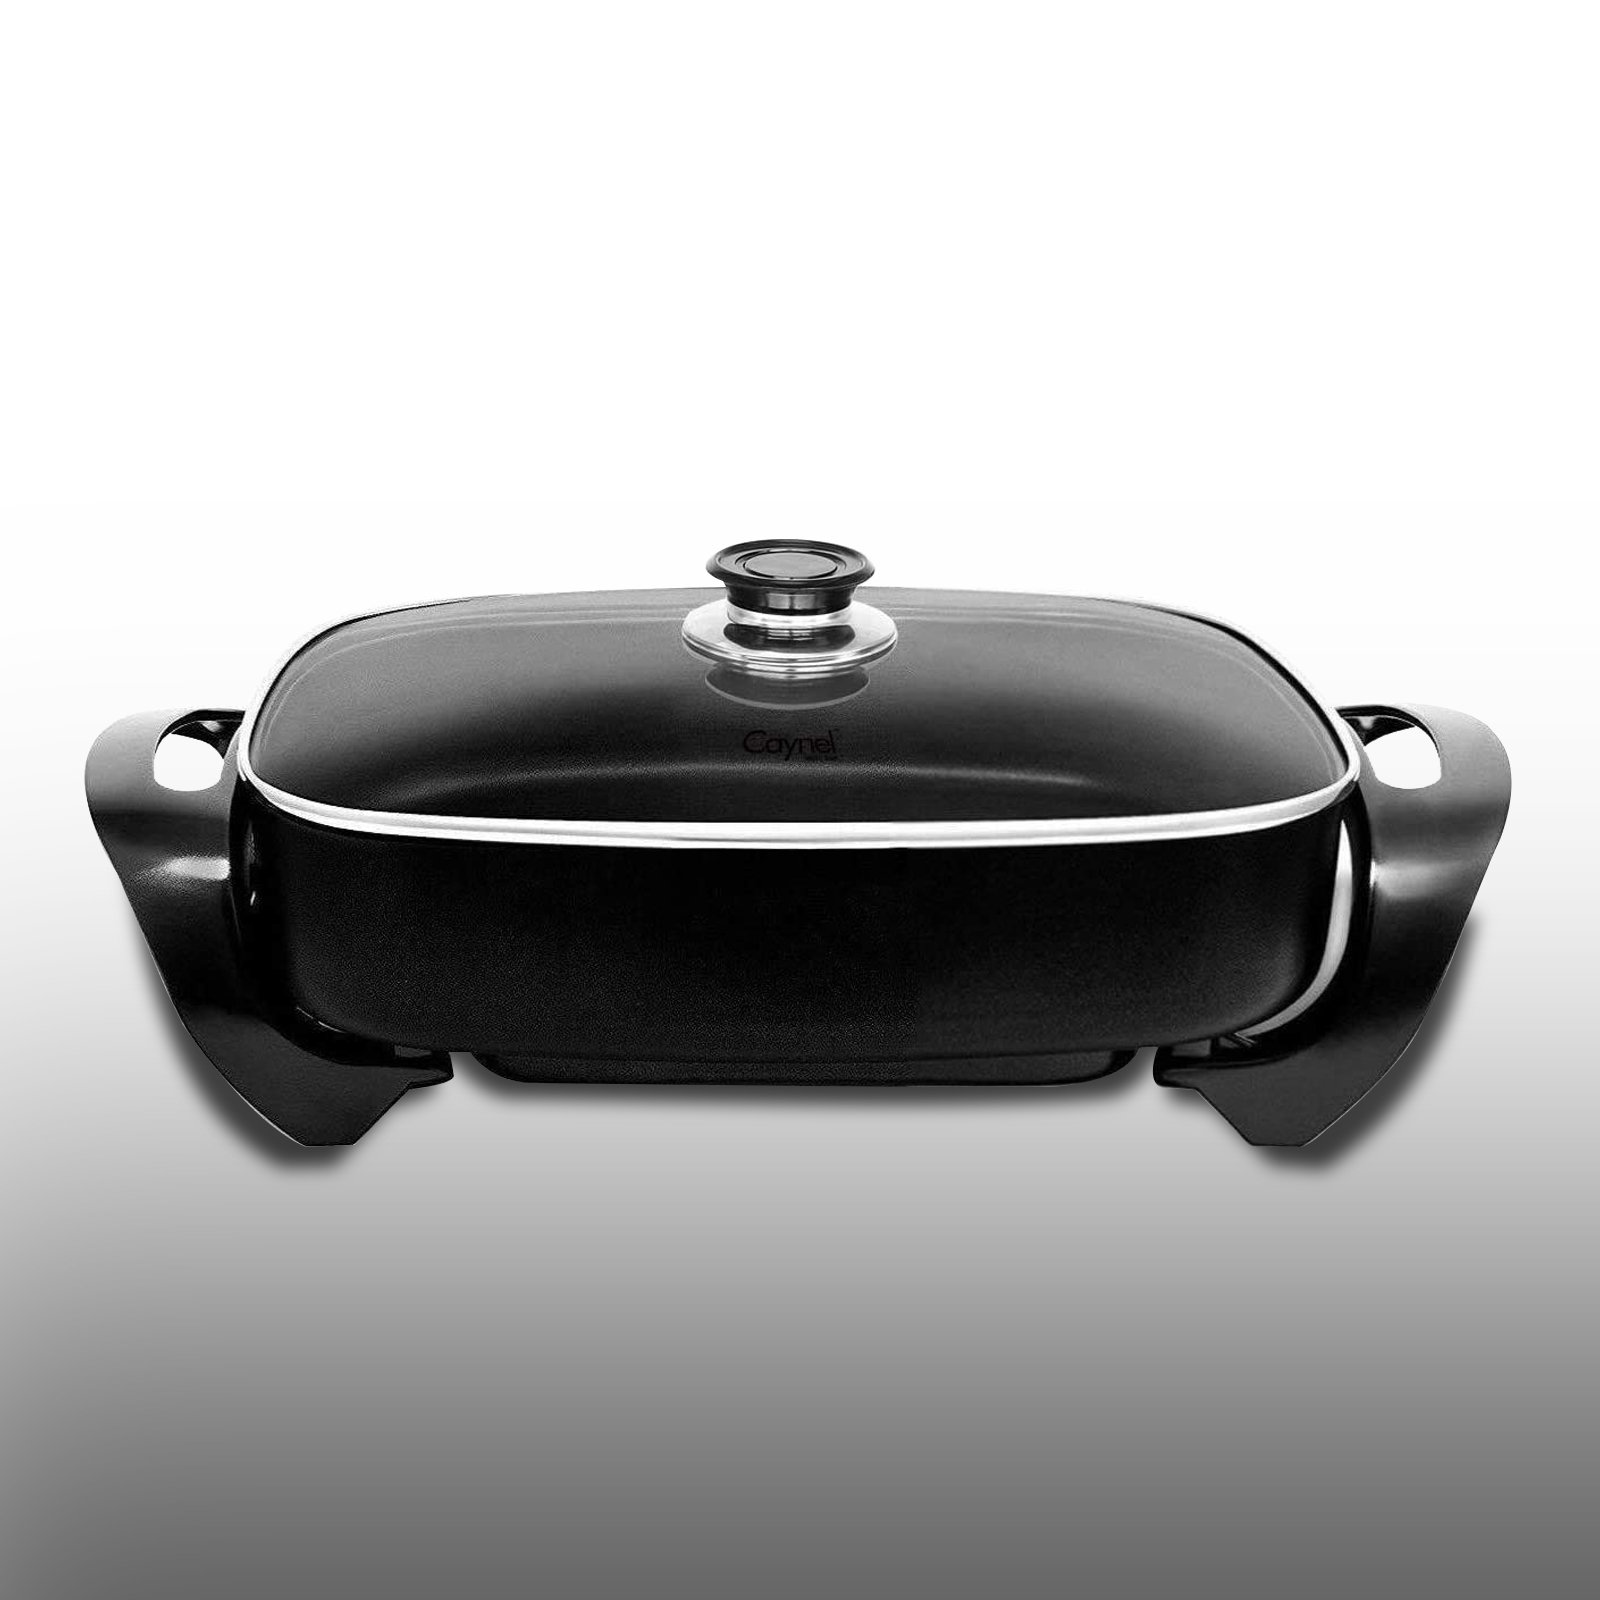 BRAND NEW PRESTO 16 CERAMIC ELECTRIC SKILLET WITH GLASS LID MODEL NUMBER  06856